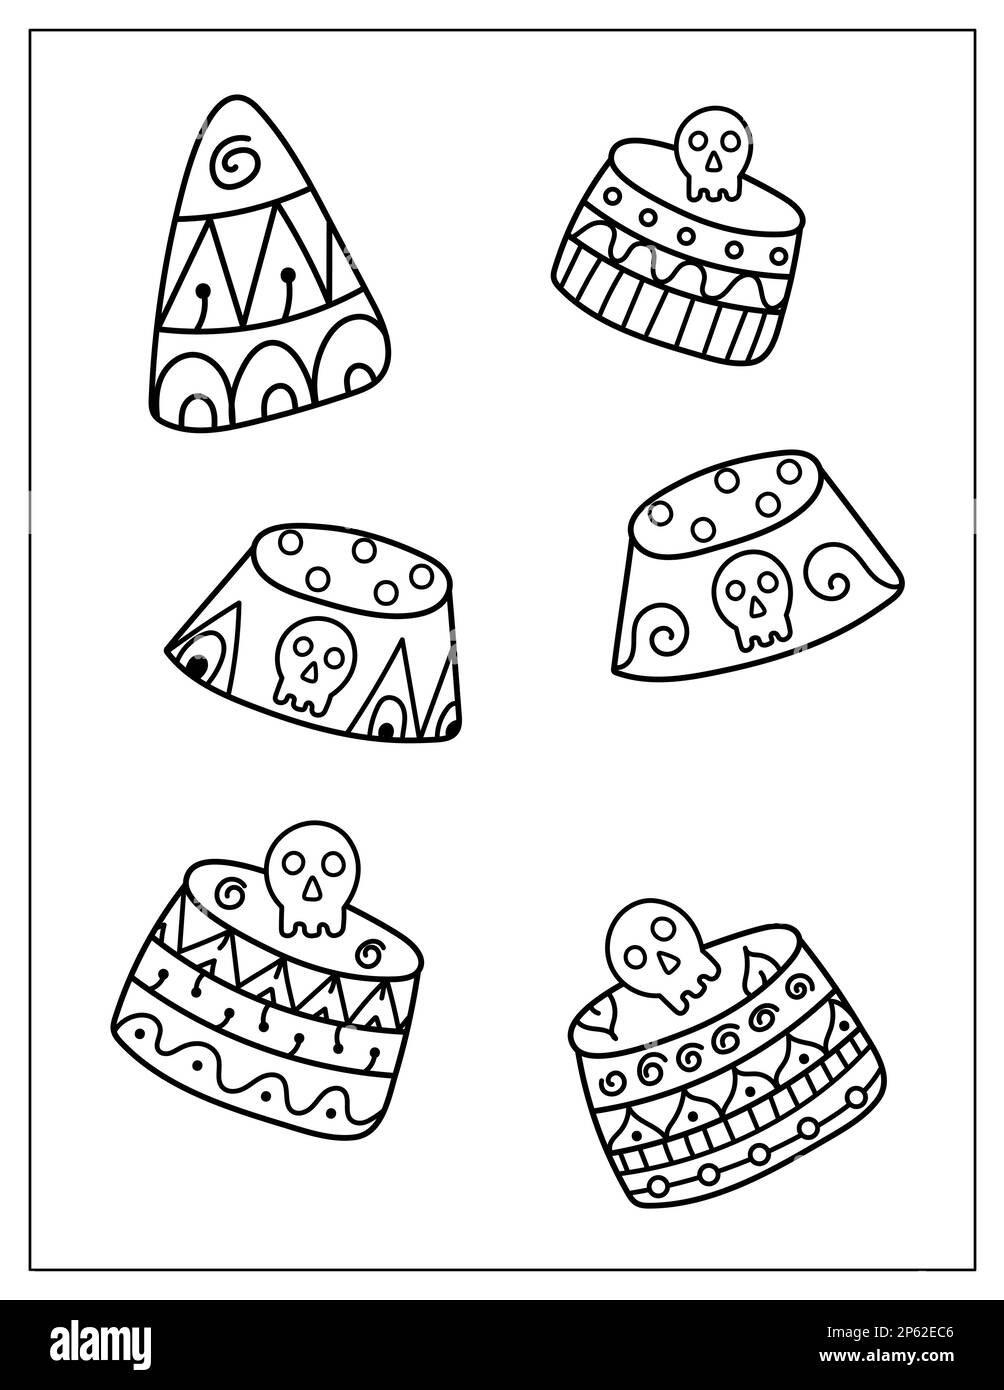 Happy Halloween coloring page with spooky cupcakes. Halloween sweets print Stock Vector